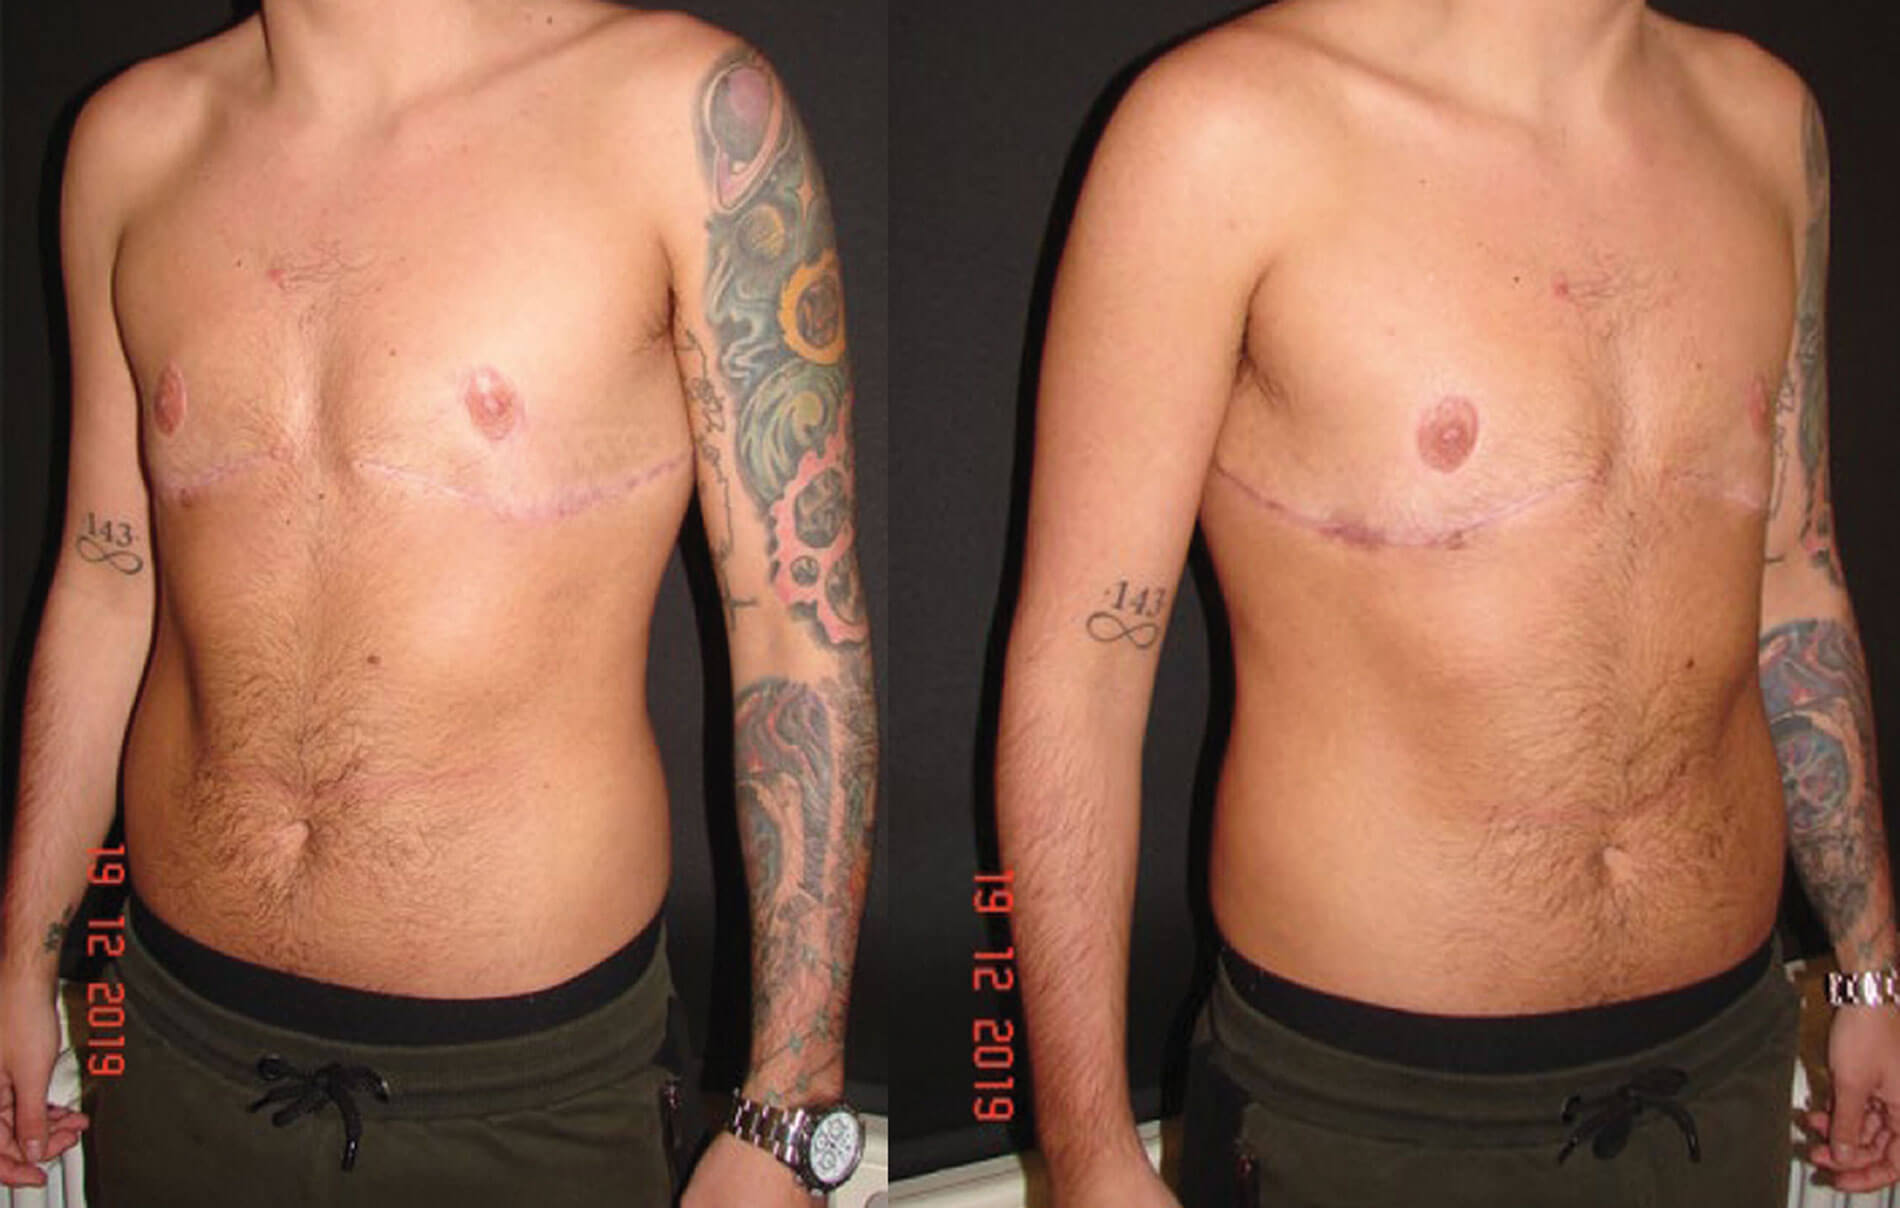 Masculinising chest wall surgery ('top surgery')